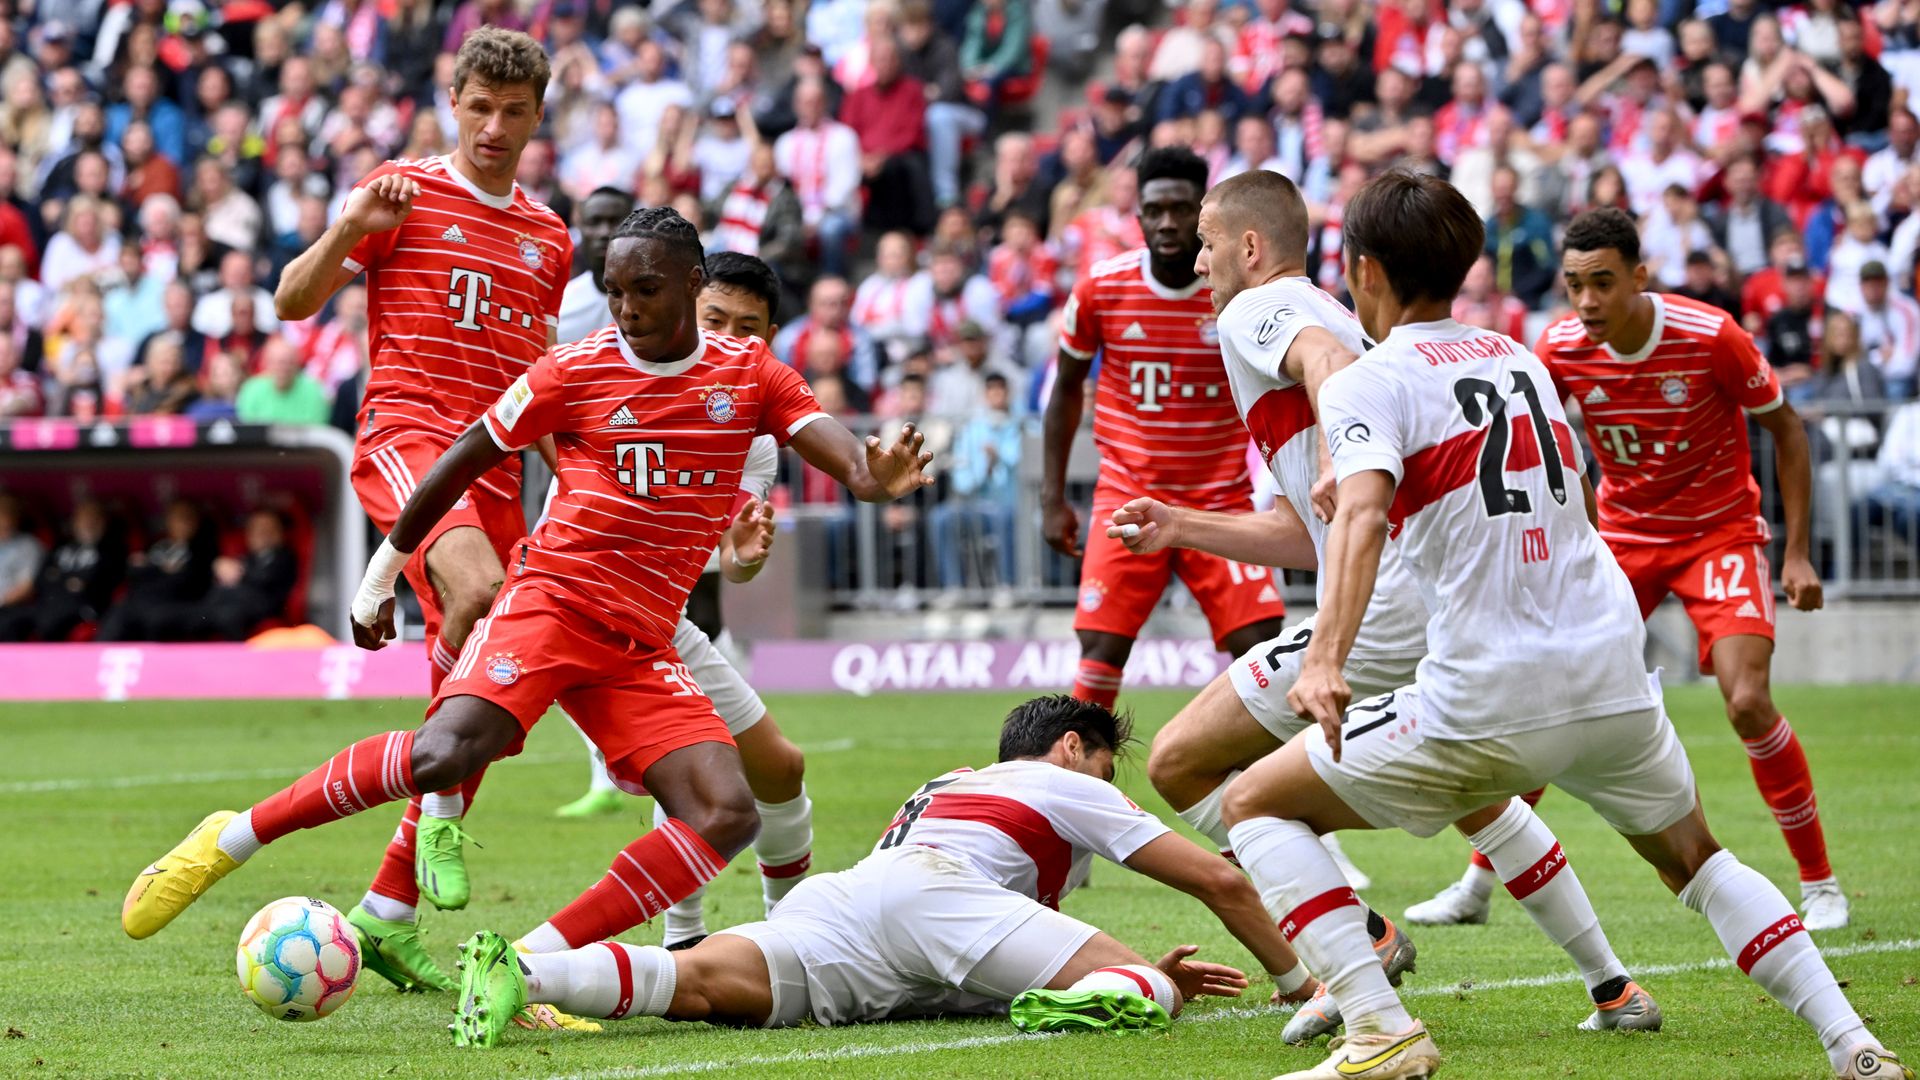 Europe: Tel becomes Bayern's youngest scorer but Stuttgart claim late draw